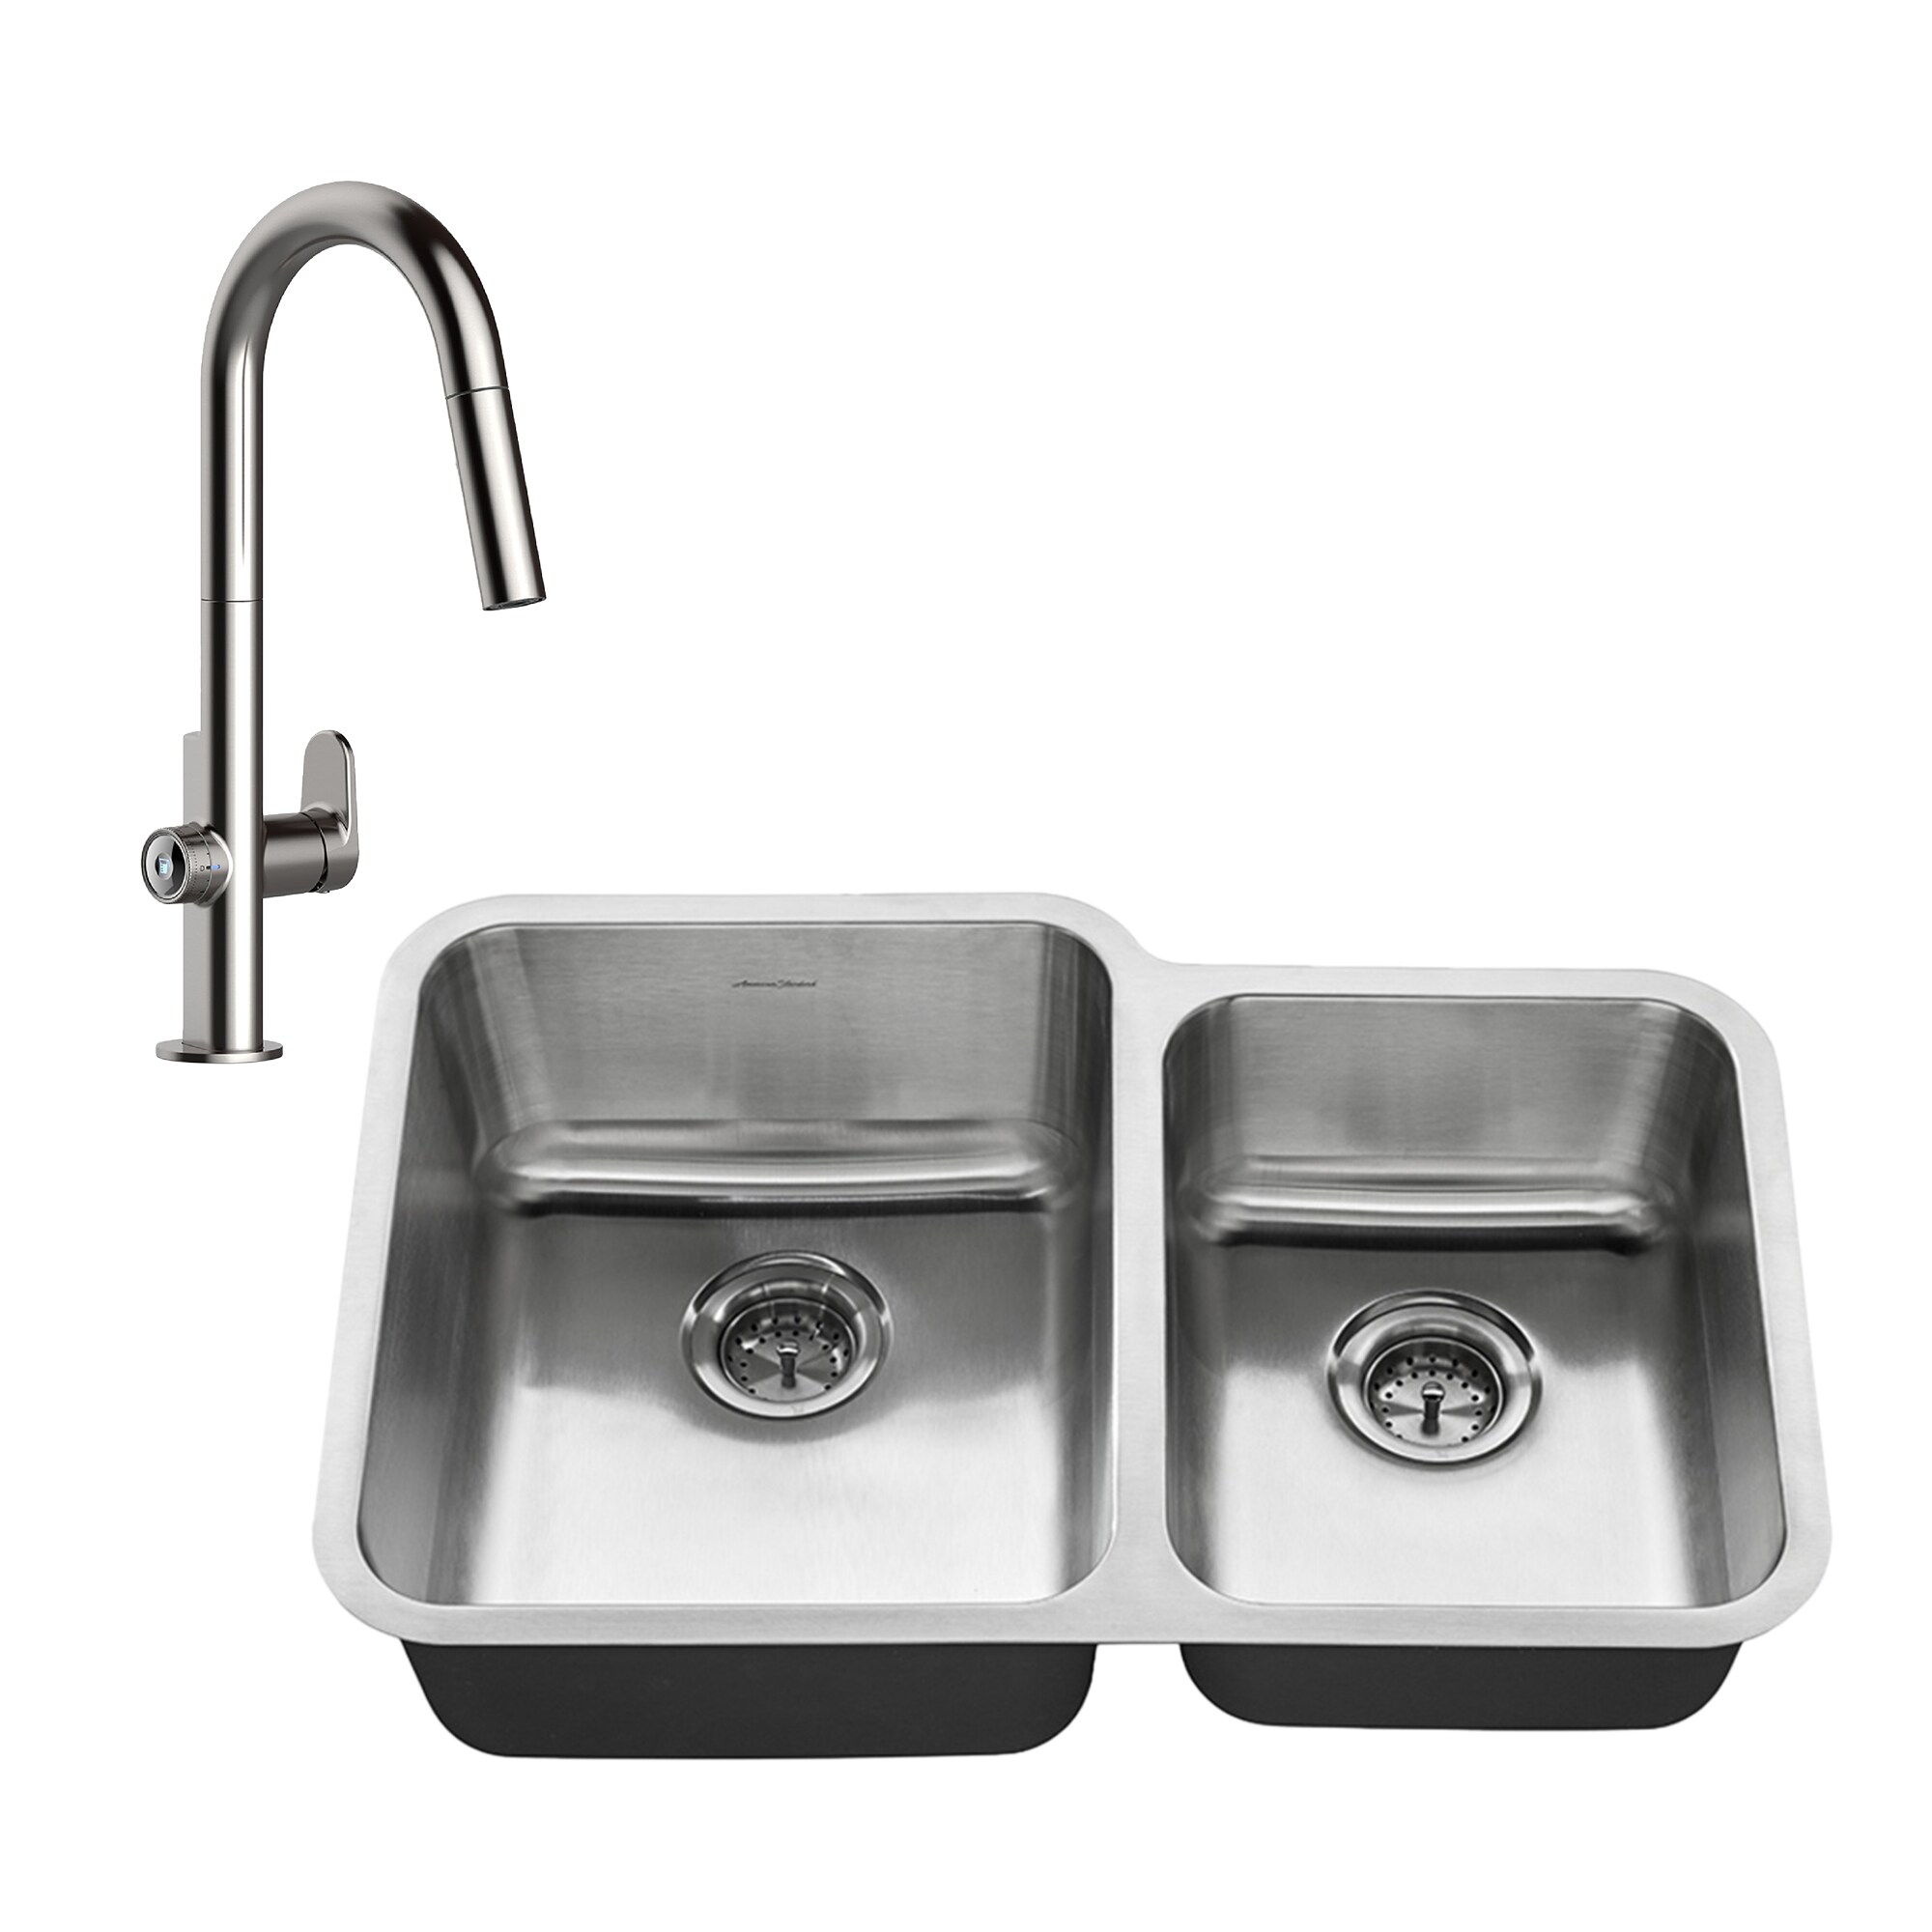 Shop American Standard Danville Stainless Steel Single Bowl Kitchen Sink  Collection at